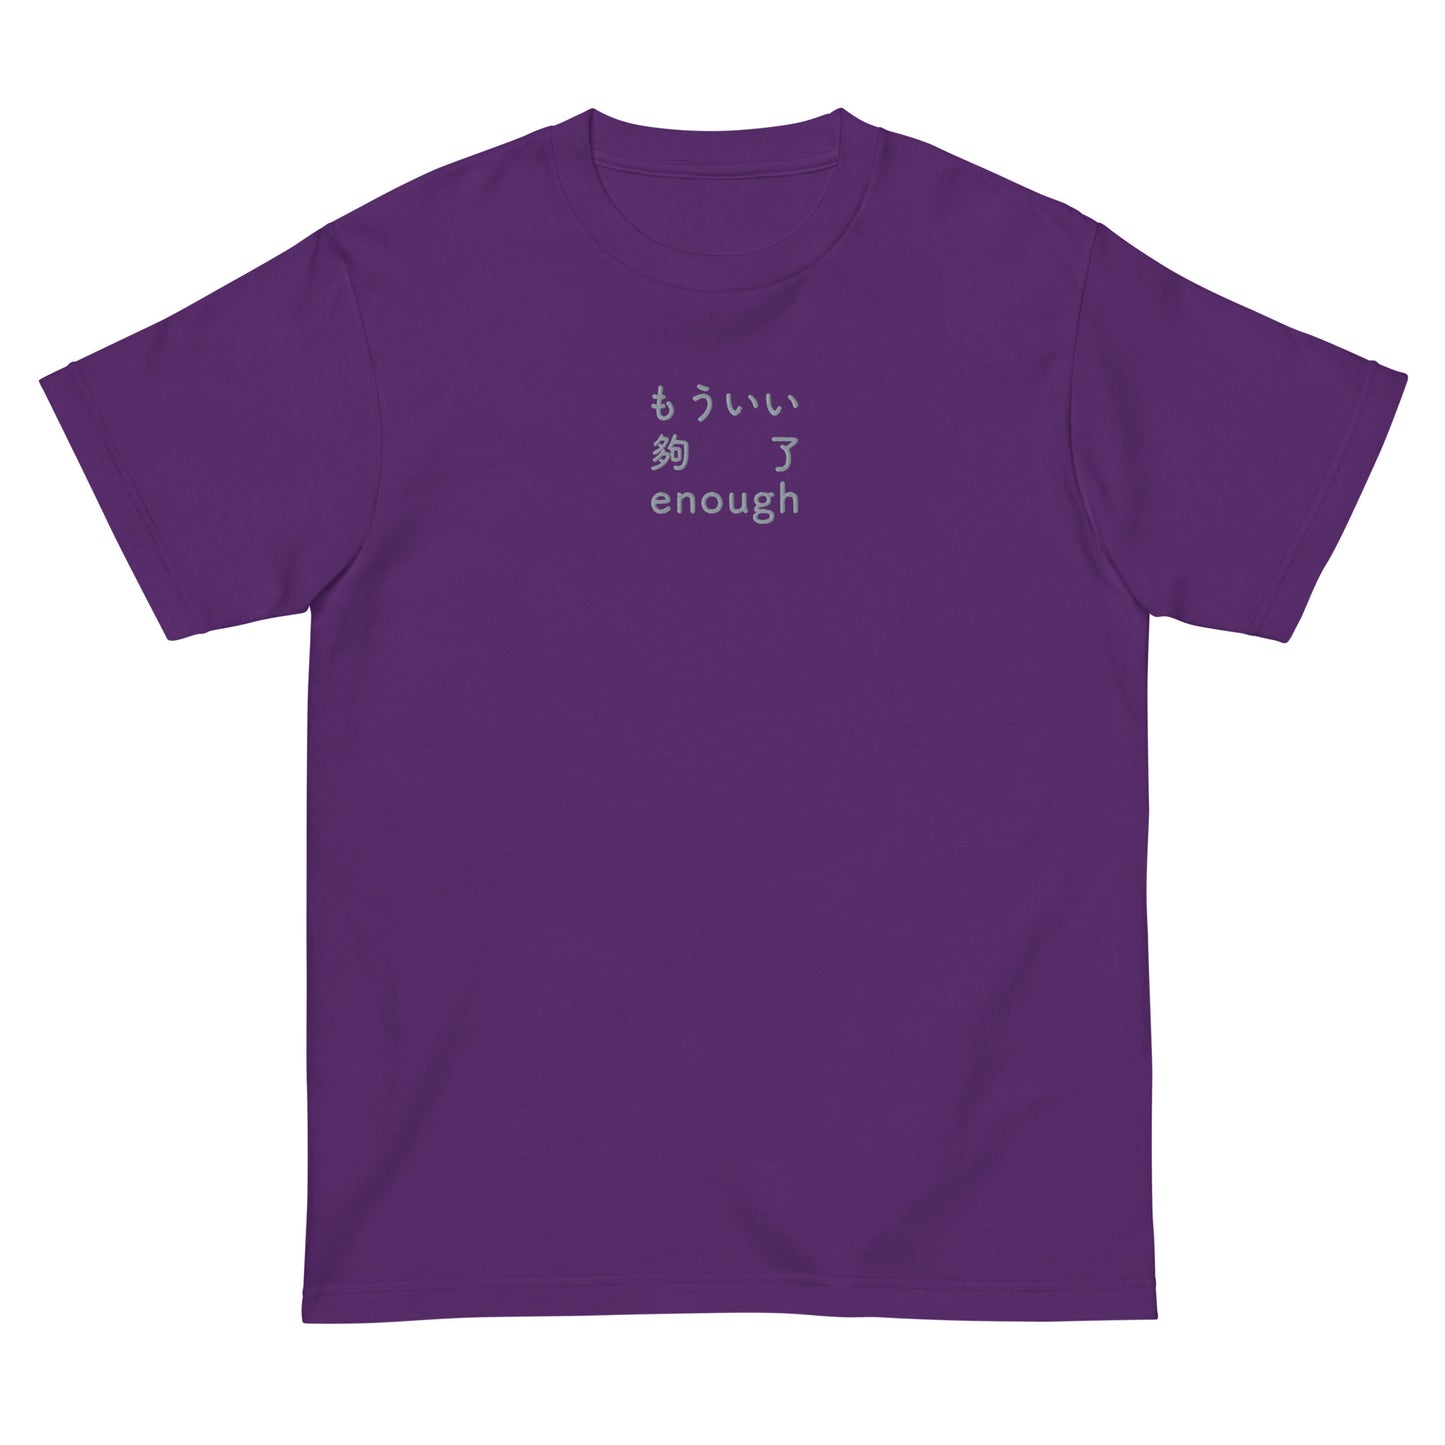 Purple High Quality Tee - Front Design with an light gray Embroidery "Enough" in Japanese,Chinese and English